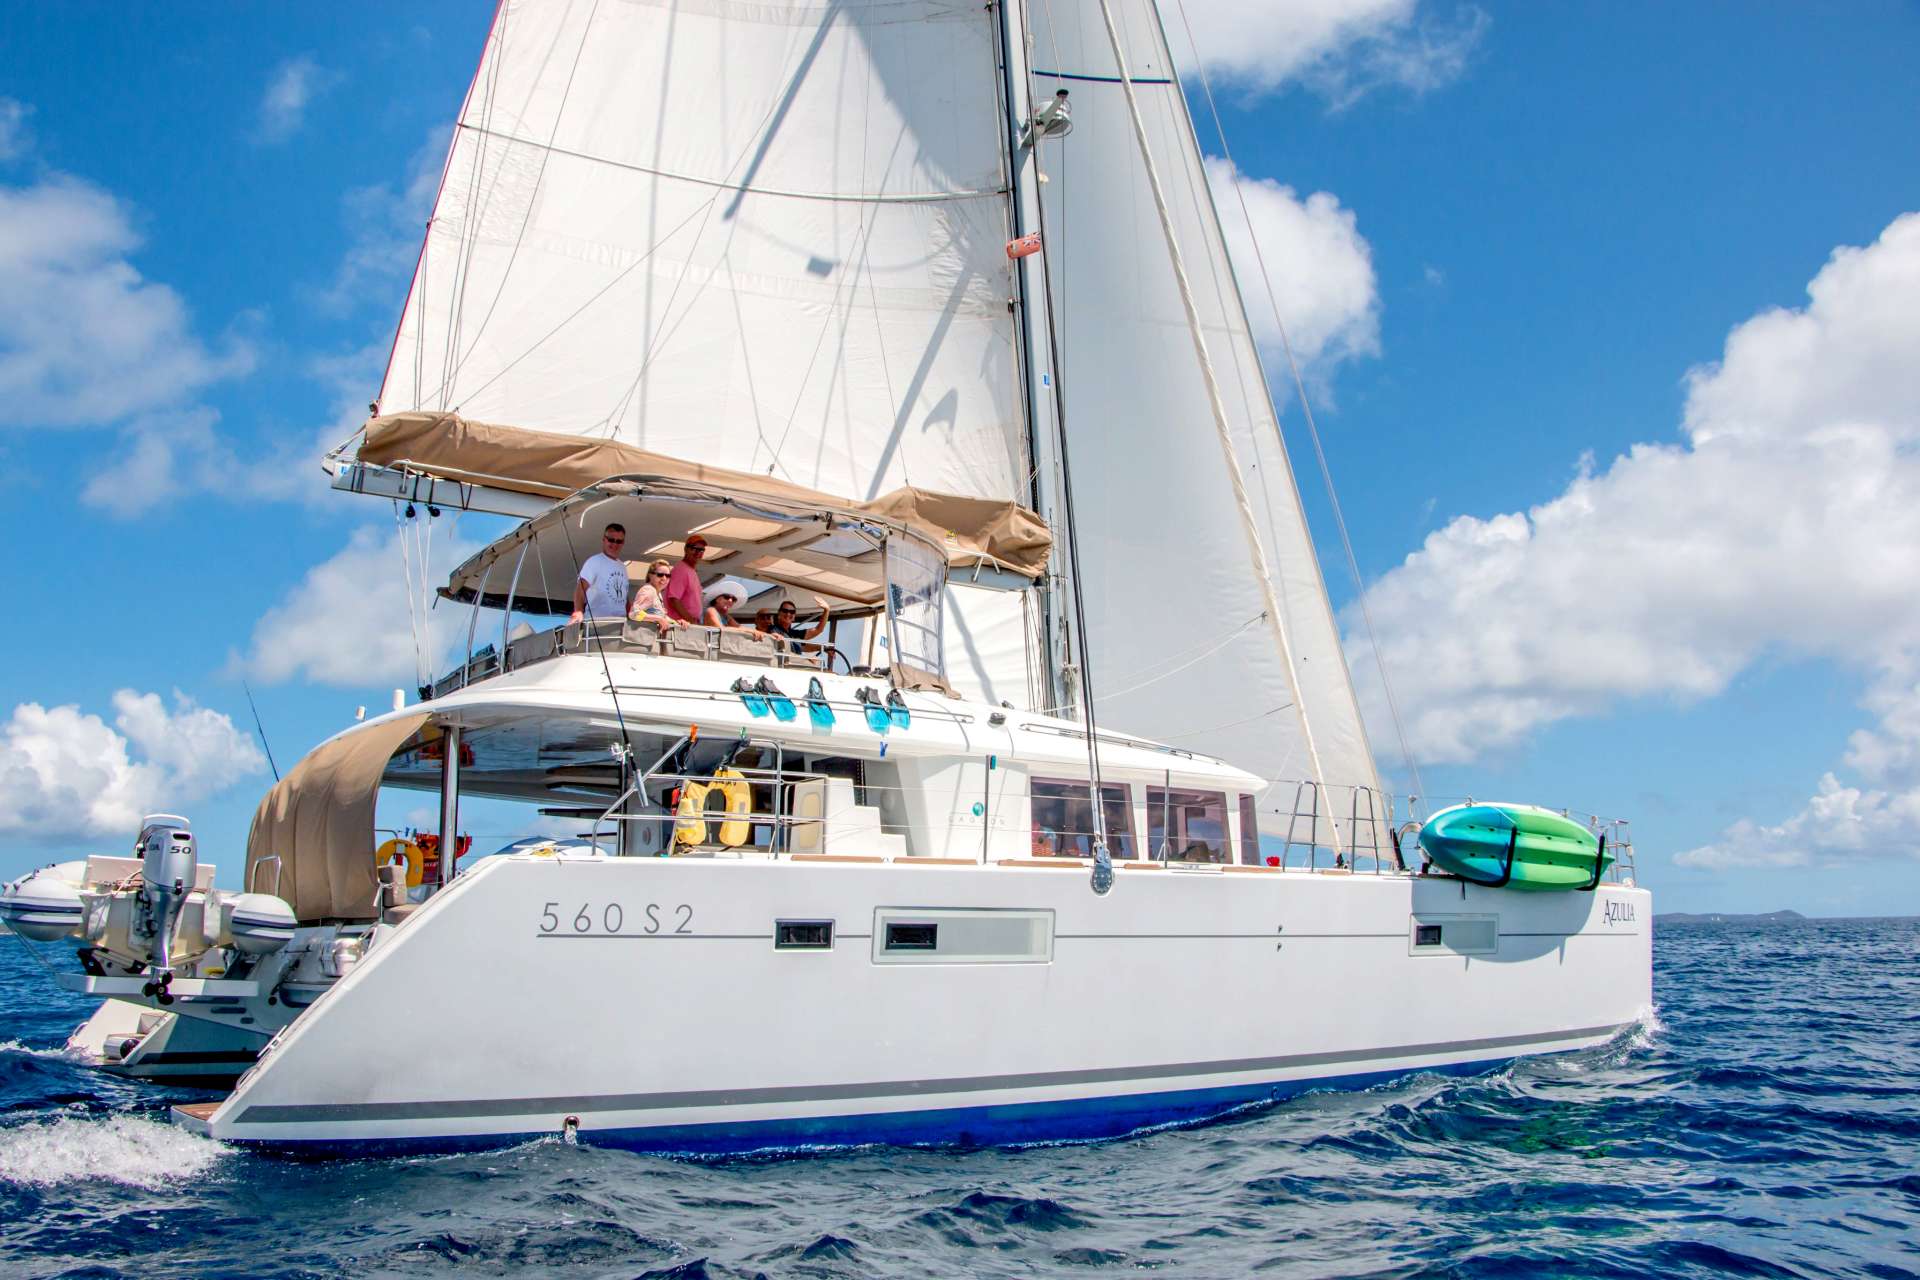 AZULIA II, The Premier Caribbean Sailing Yacht Charter. Imagine a fully crewed and catered luxury dream vacation on Azulia, a 2015 Lagoon 560 S2 catamaran. Experience the tranquility and beauty of the Virgin Islands while wrapped in the elegance and prestige of the finest sailing multihull in the Caribbean. 

Experience the unspoiled beauty and quality sailing of the Virgin Islands on Azulia II, a premium, fully-equipped Lagoon catamaran available for charter. Excursions depart from the any port in the British Virgin Islands, US Virgin Islands or from eastern Puerto Rico. Explore the beautiful Caribbean while enjoying delectable galley treats aboard beautiful Azulia. Having been gently chartered and meticulously maintained with the same crew, Azulia is among the finest yacht charters that the Virgin Islands can offer.

Azulia II accommodates up to 8 guests in 3 elegant queen guest suites &amp; 1 bunk cabin, each with its own ensuite head and shower. Cabins are beautifully appointed with luxury bedding and linens. She is air-conditioned throughout with individual controls in each cabin. Crew quarters are located in port forward cabin, with own head and shower.